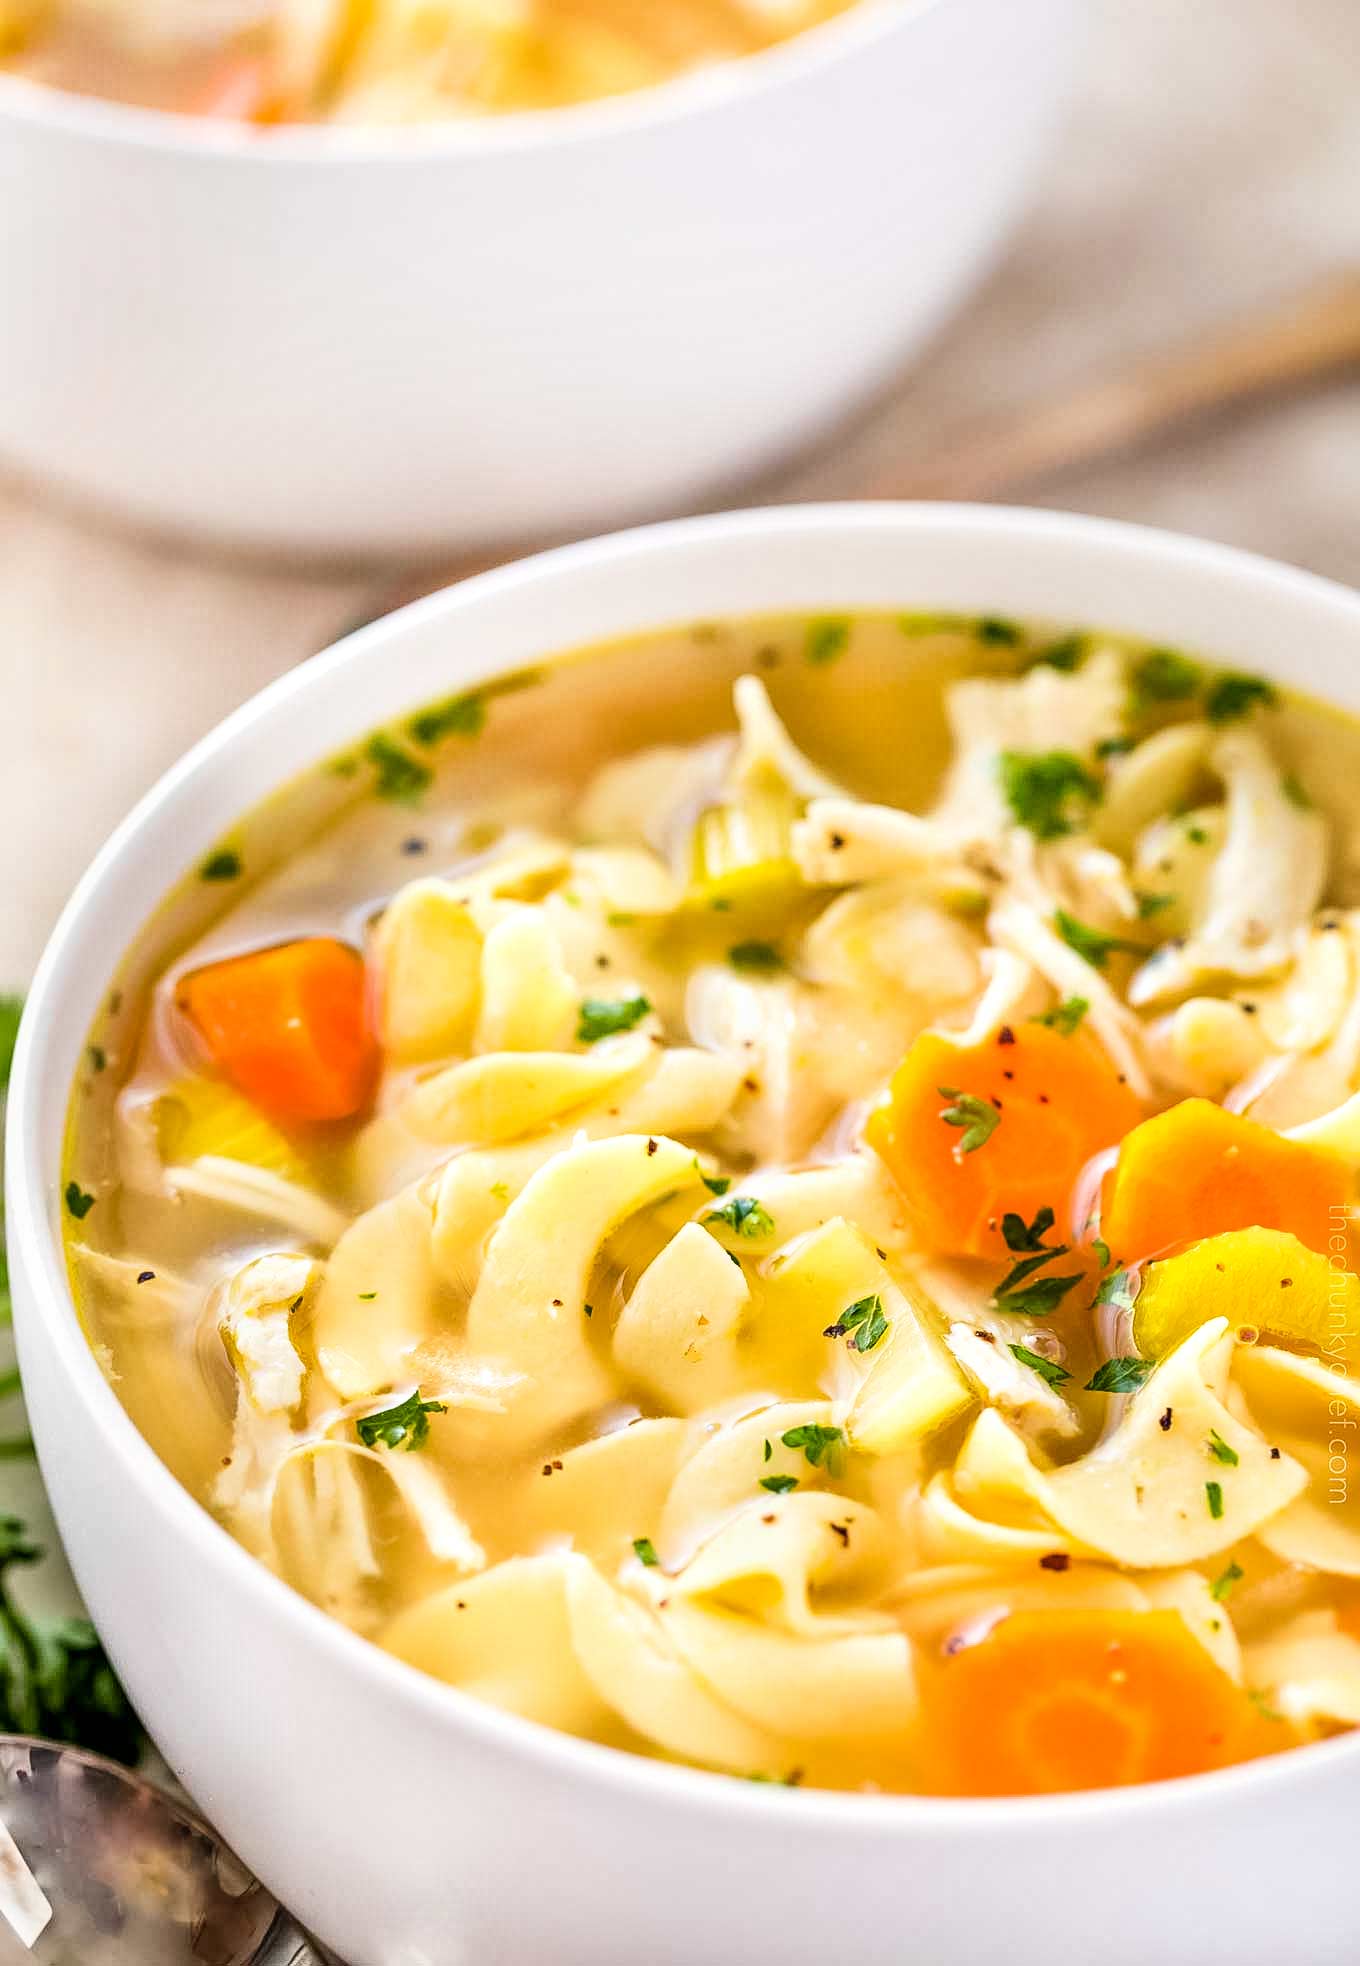 Homemade Crockpot Chicken Noodle Soup - The Chunky Chef